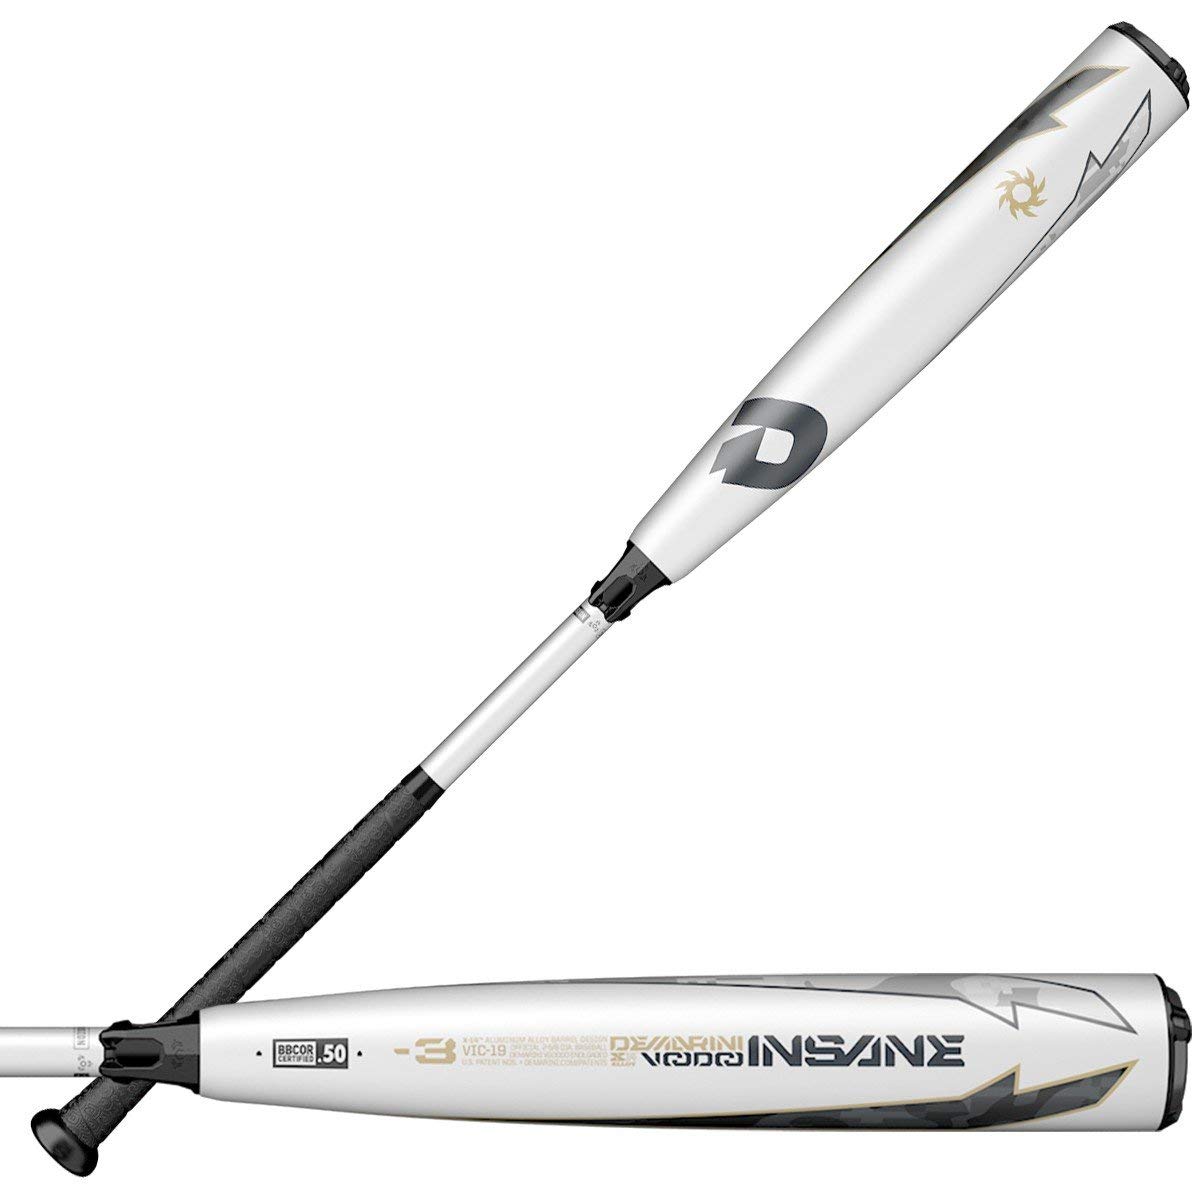 demarini-2019-voodoo-insane-3-bbcor-baseball-bat-33-inch-30-oz WTDXVIC3033-19 DeMarini 887768692636 `-3 Length to weight ratio End-loaded swing weight Paraflex Plus composite